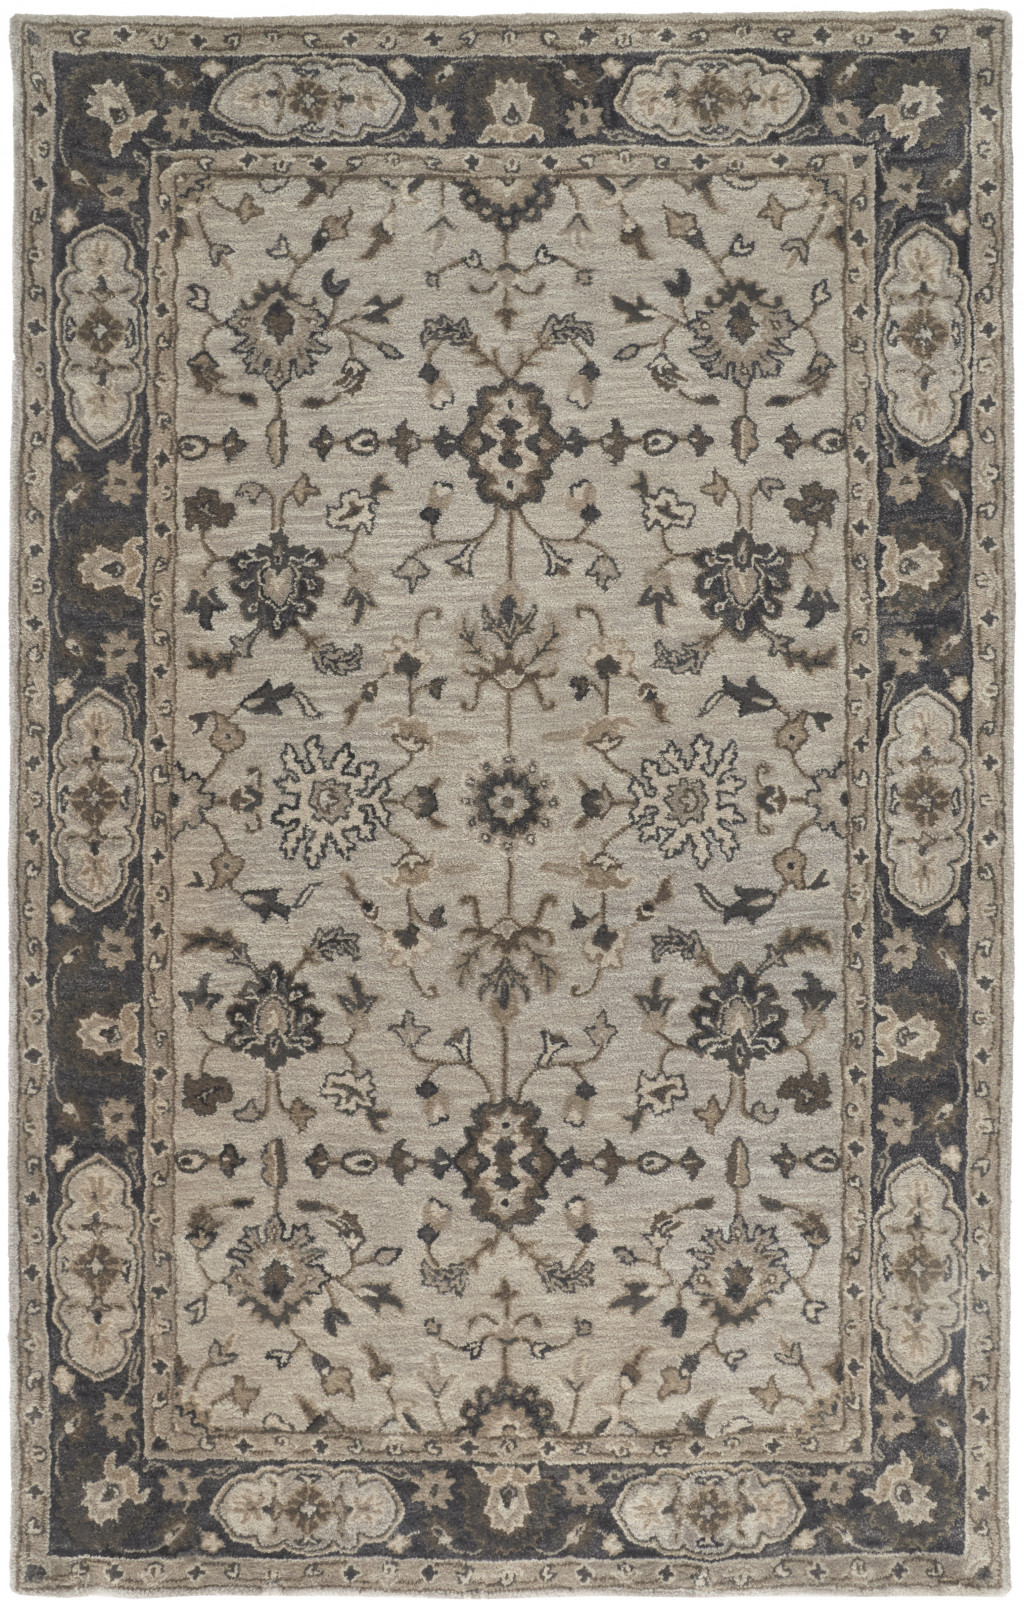 5' X 8' Gray Ivory And Taupe Wool Floral Tufted Handmade Stain Resistant Area Rug-511273-1